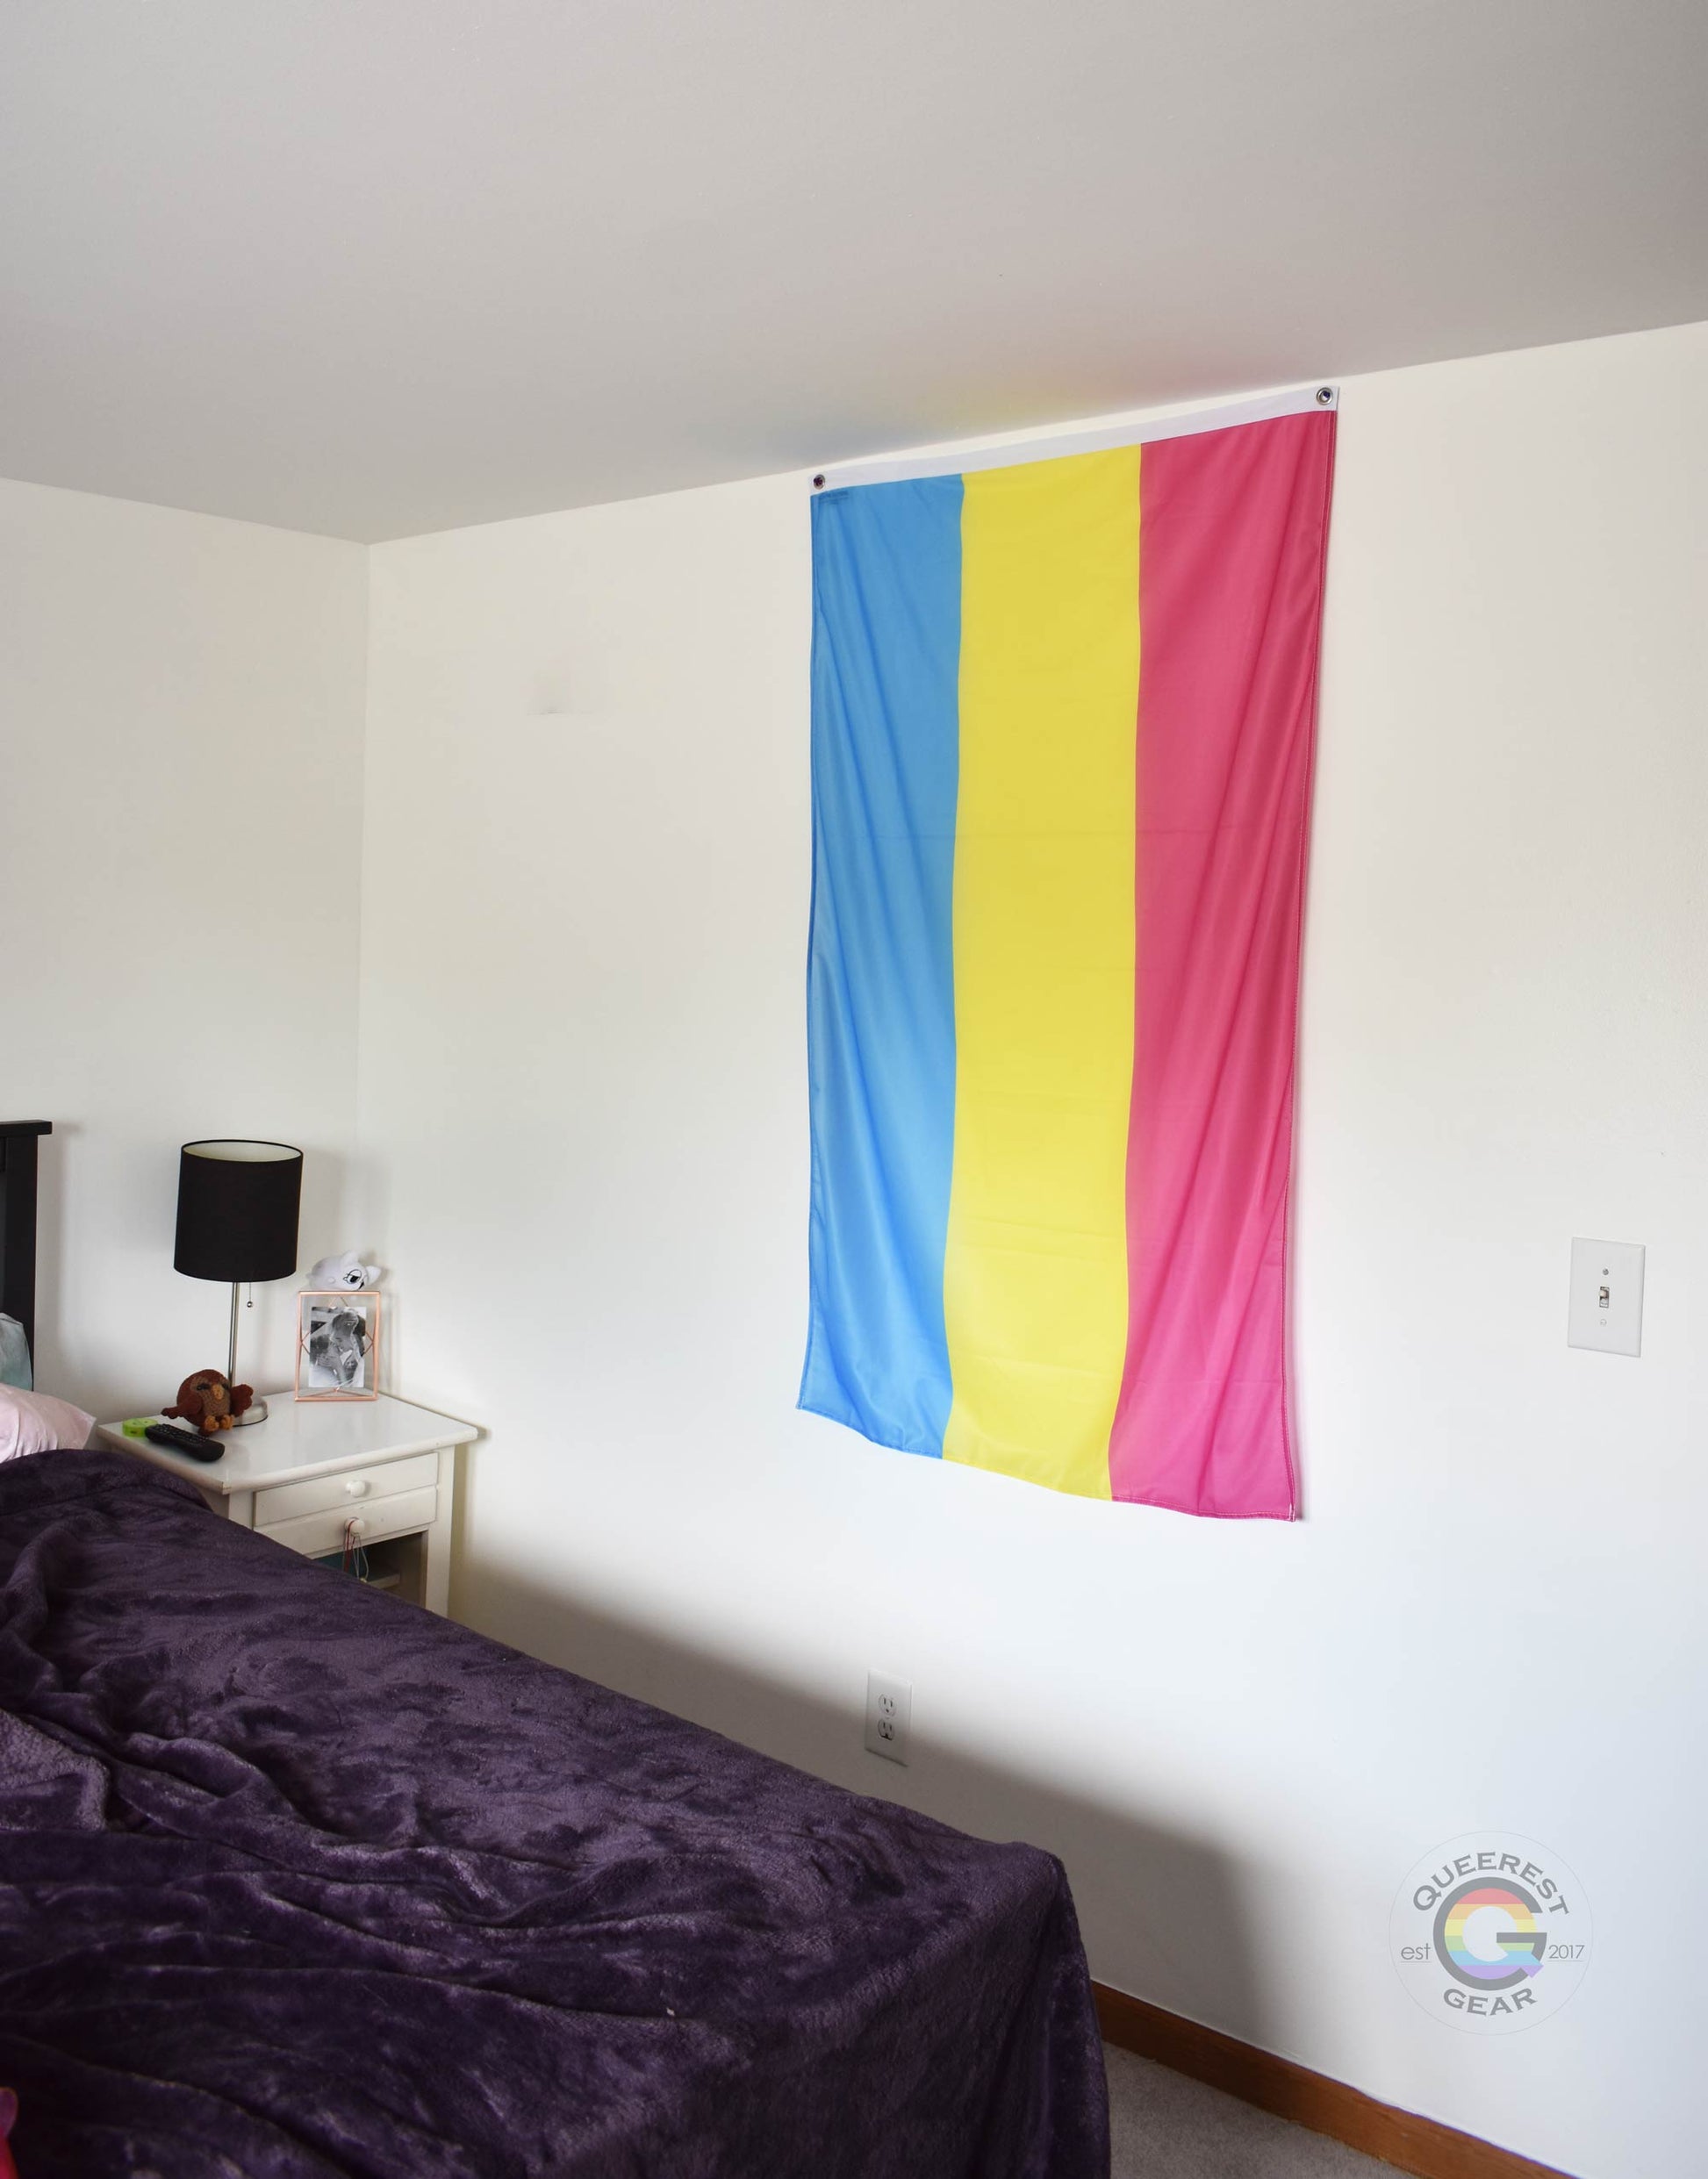 3’x5’ pansexual flag hanging vertically on the wall of a bedroom with a nightstand and a bed